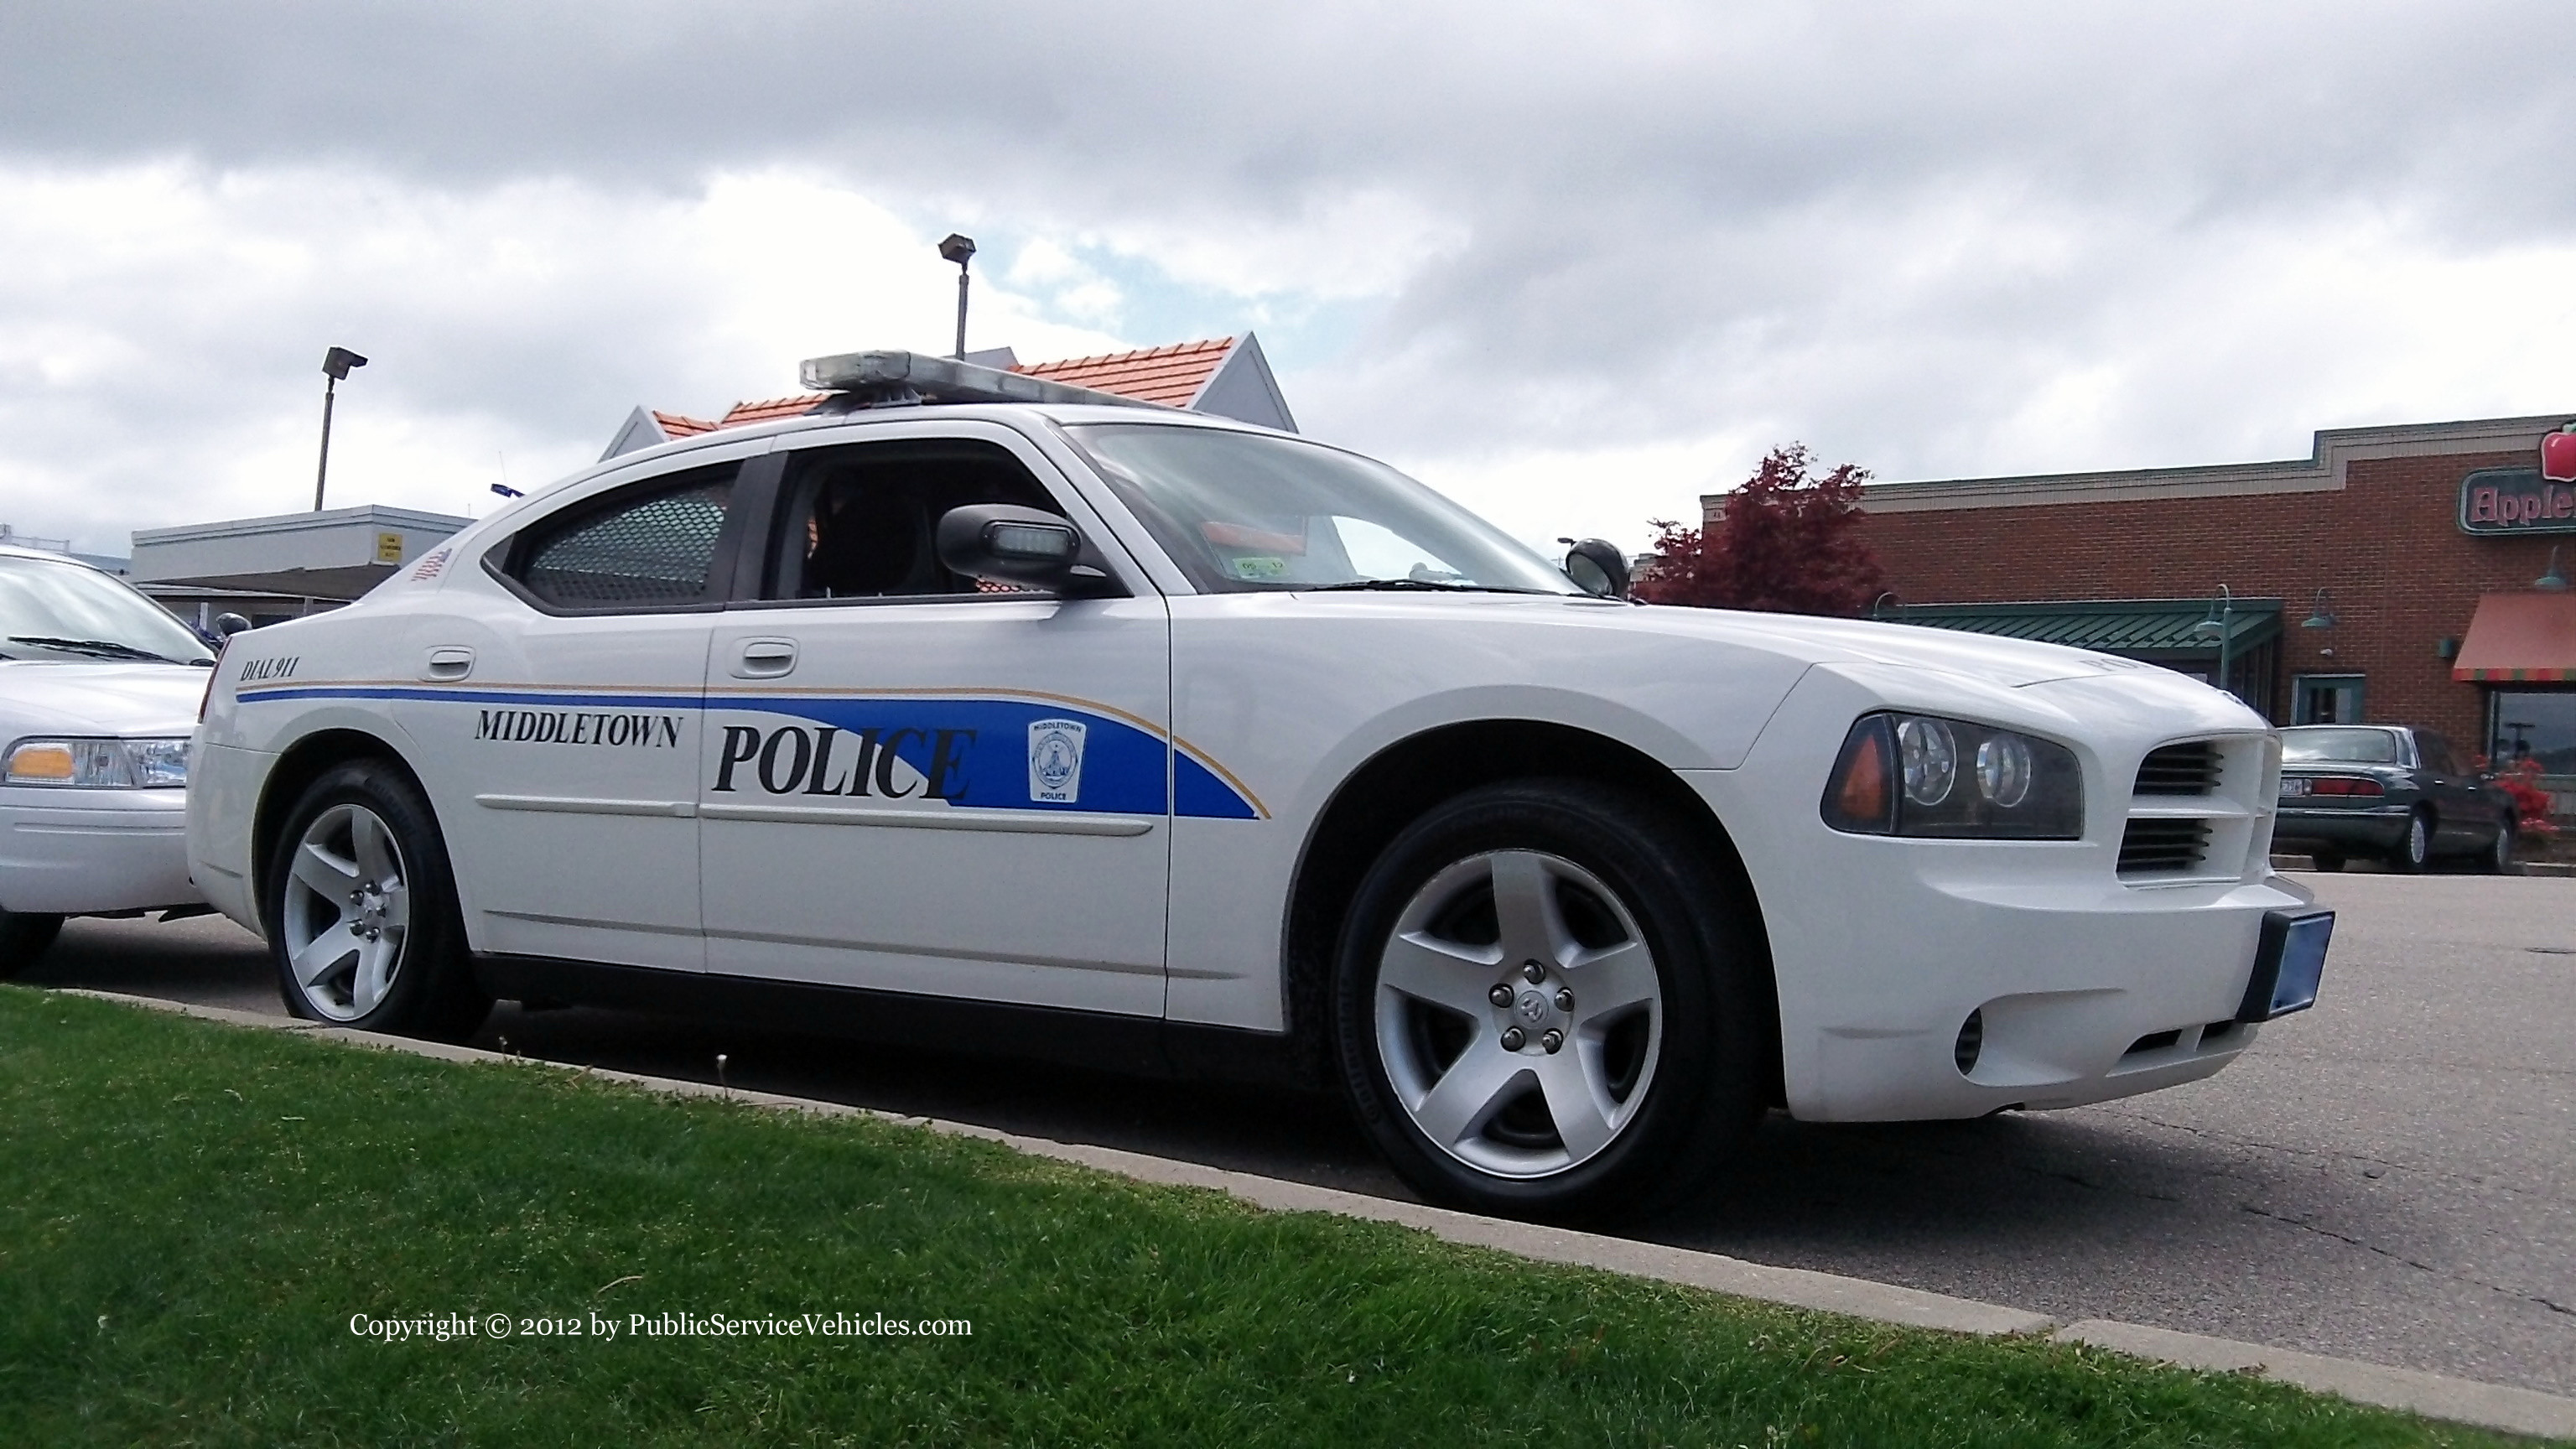 A photo  of Middletown Police
            Cruiser 4119, a 2006-2010 Dodge Charger             taken by Kieran Egan